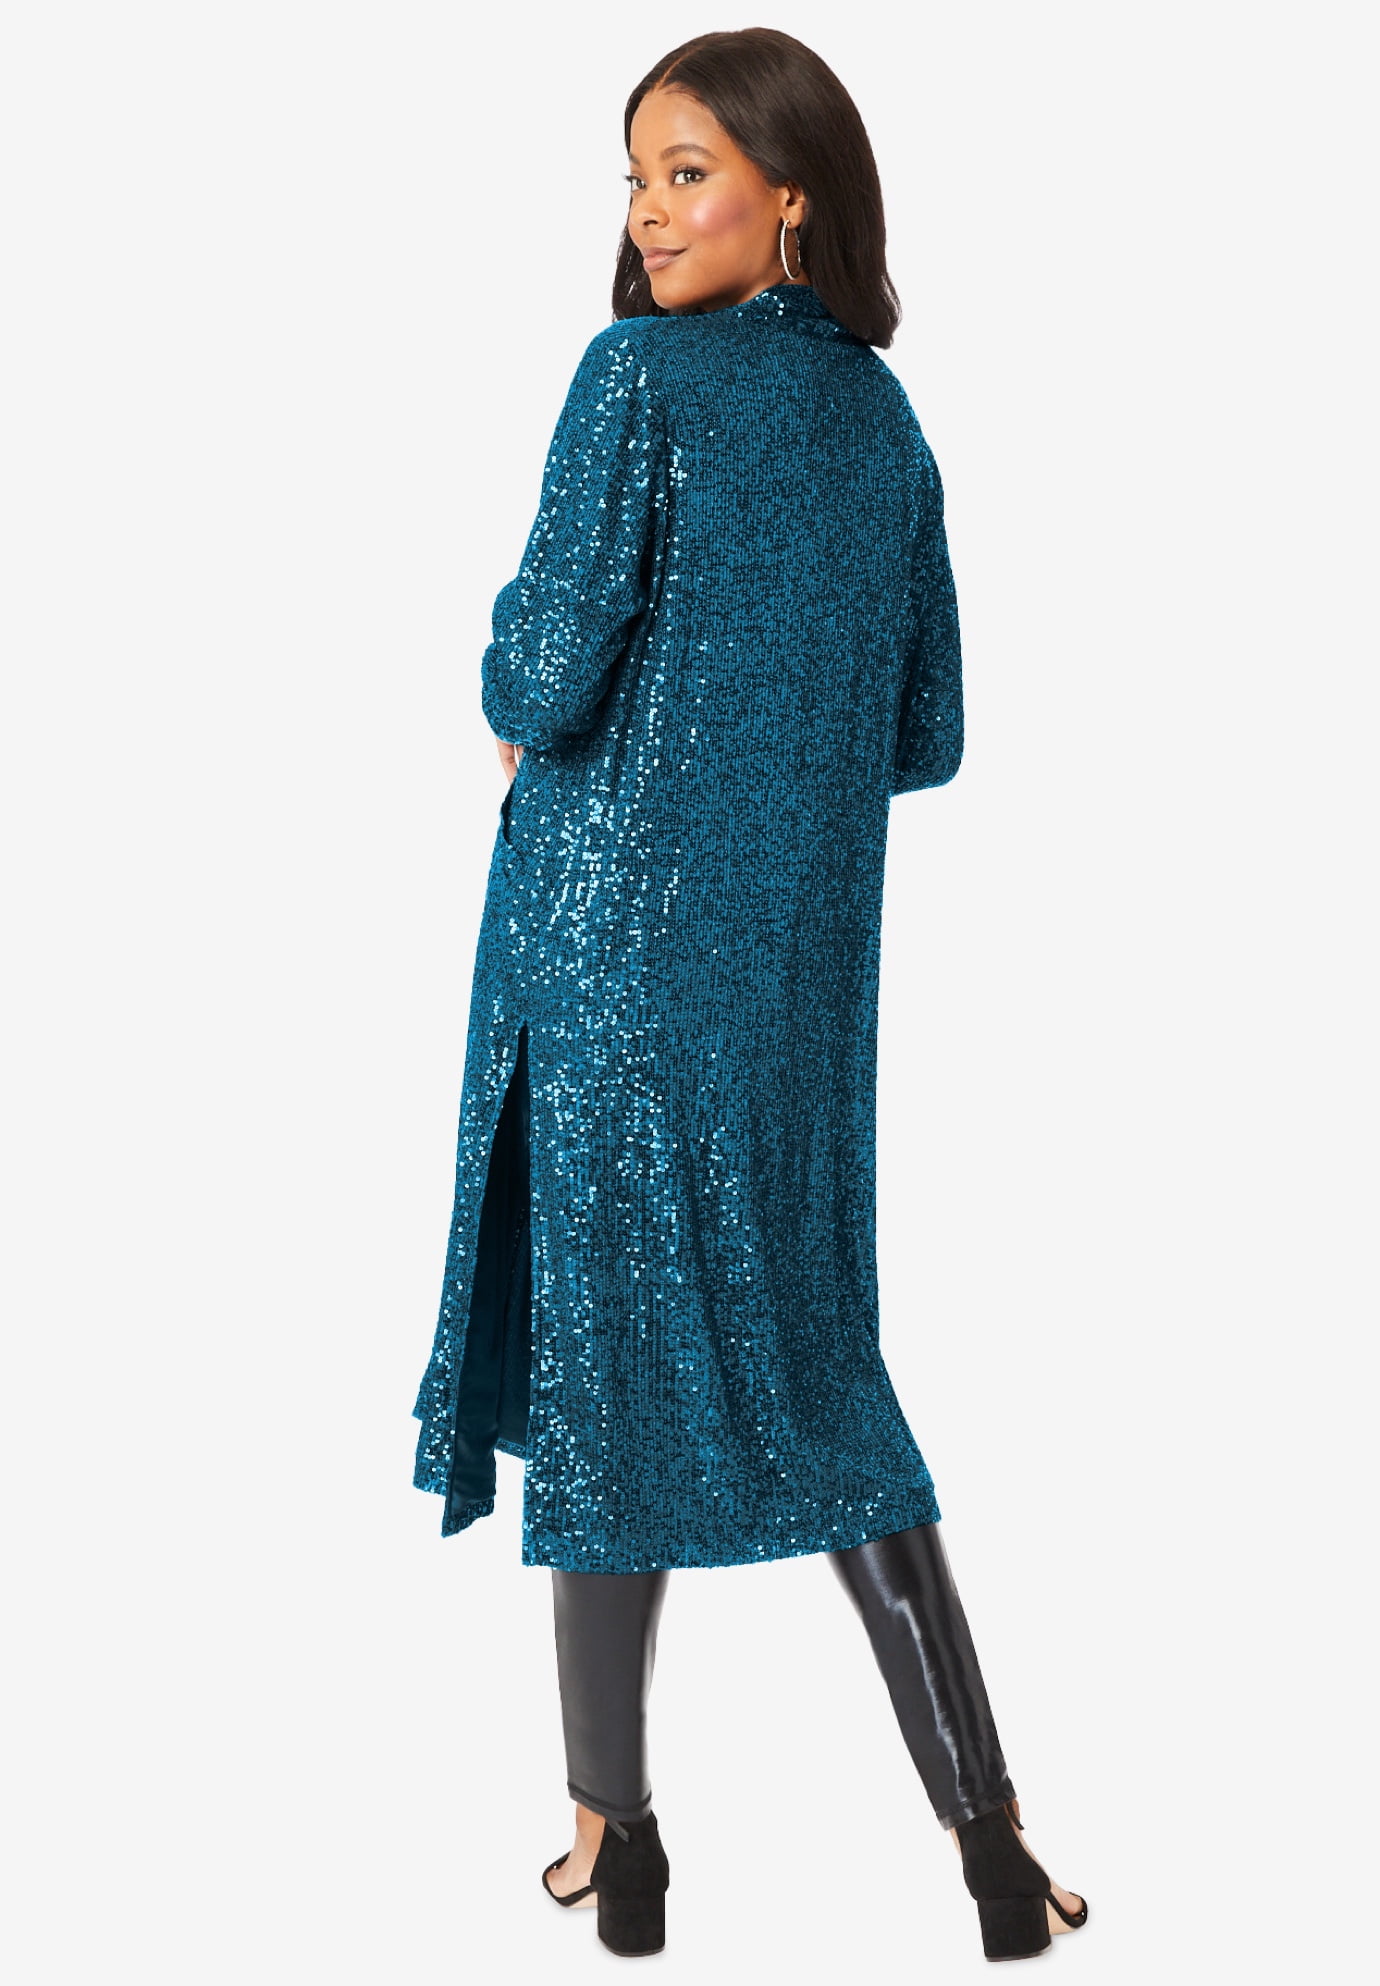 Sequin Dusters  Sequin duster, Duster jacket, Dusters